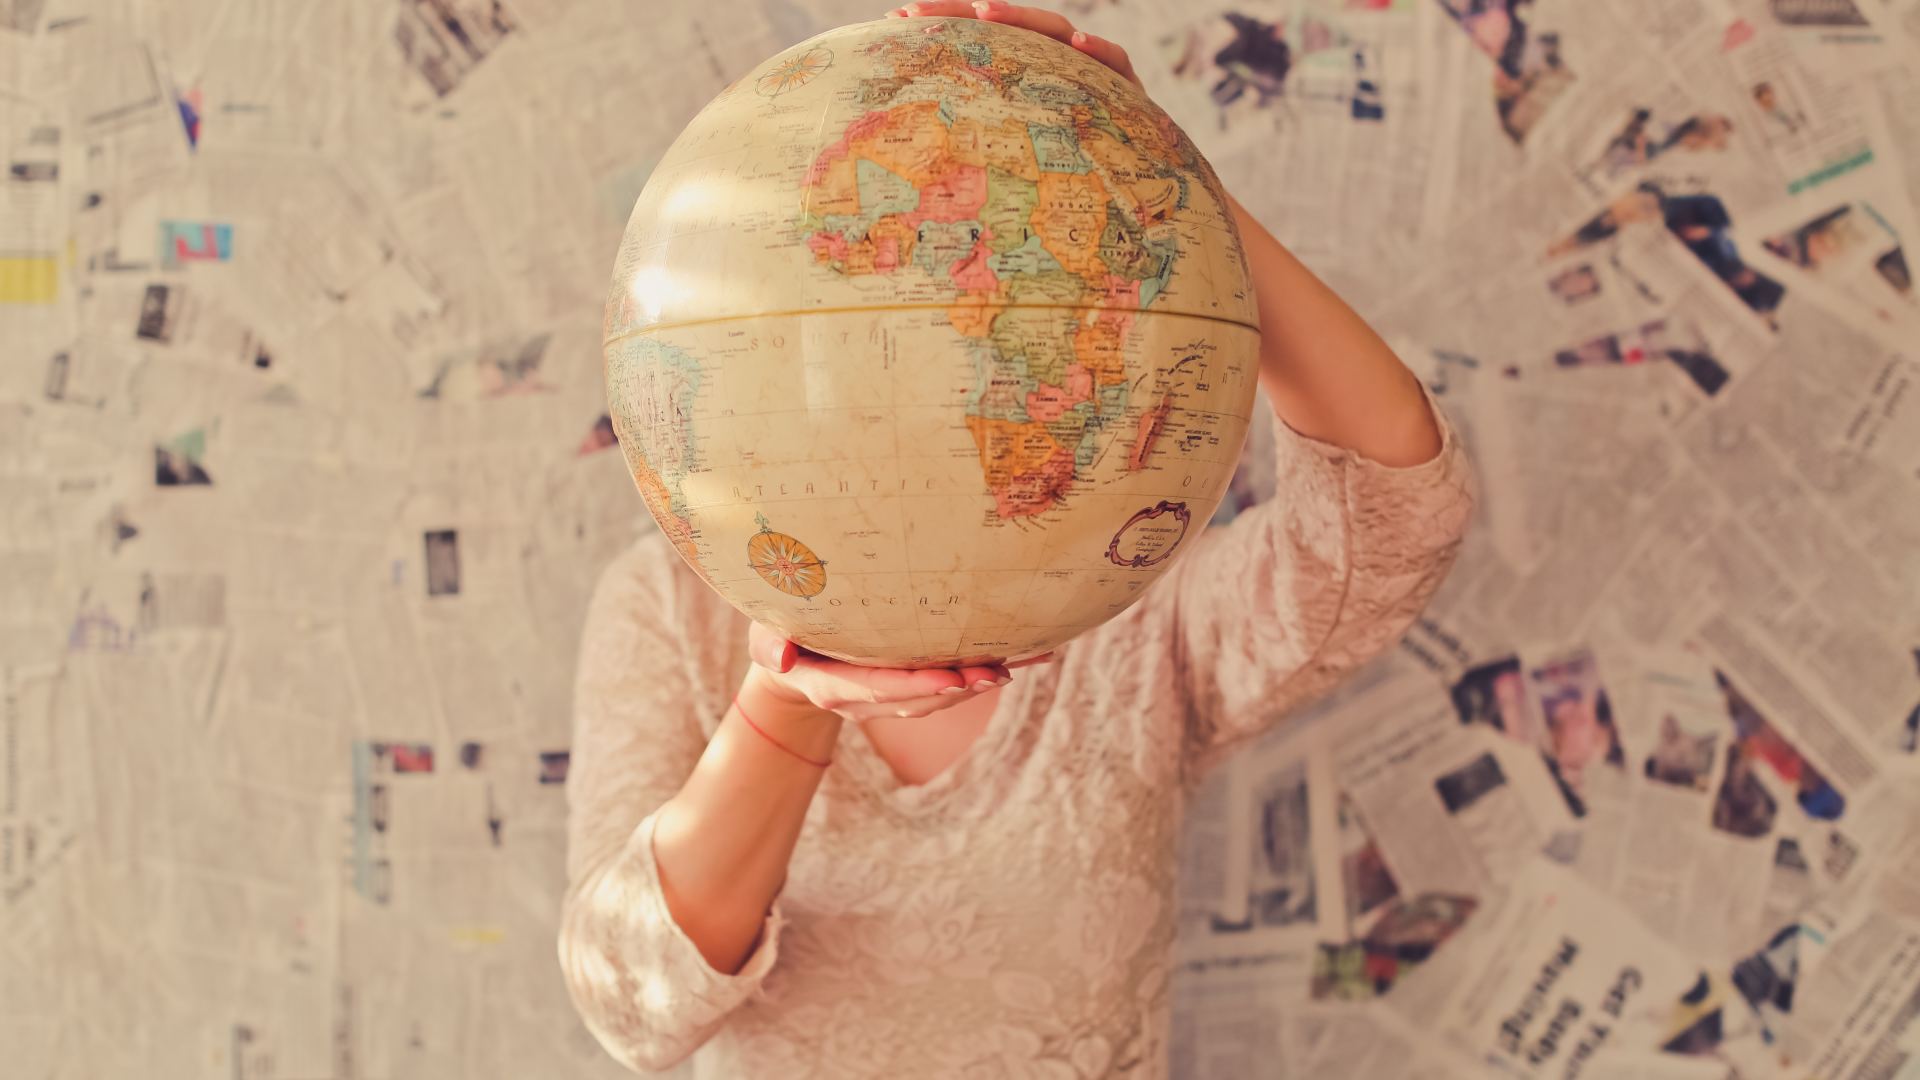 General 1920x1080 globes continents map countries women depth of field newspapers hands Africa wall frontal view beige